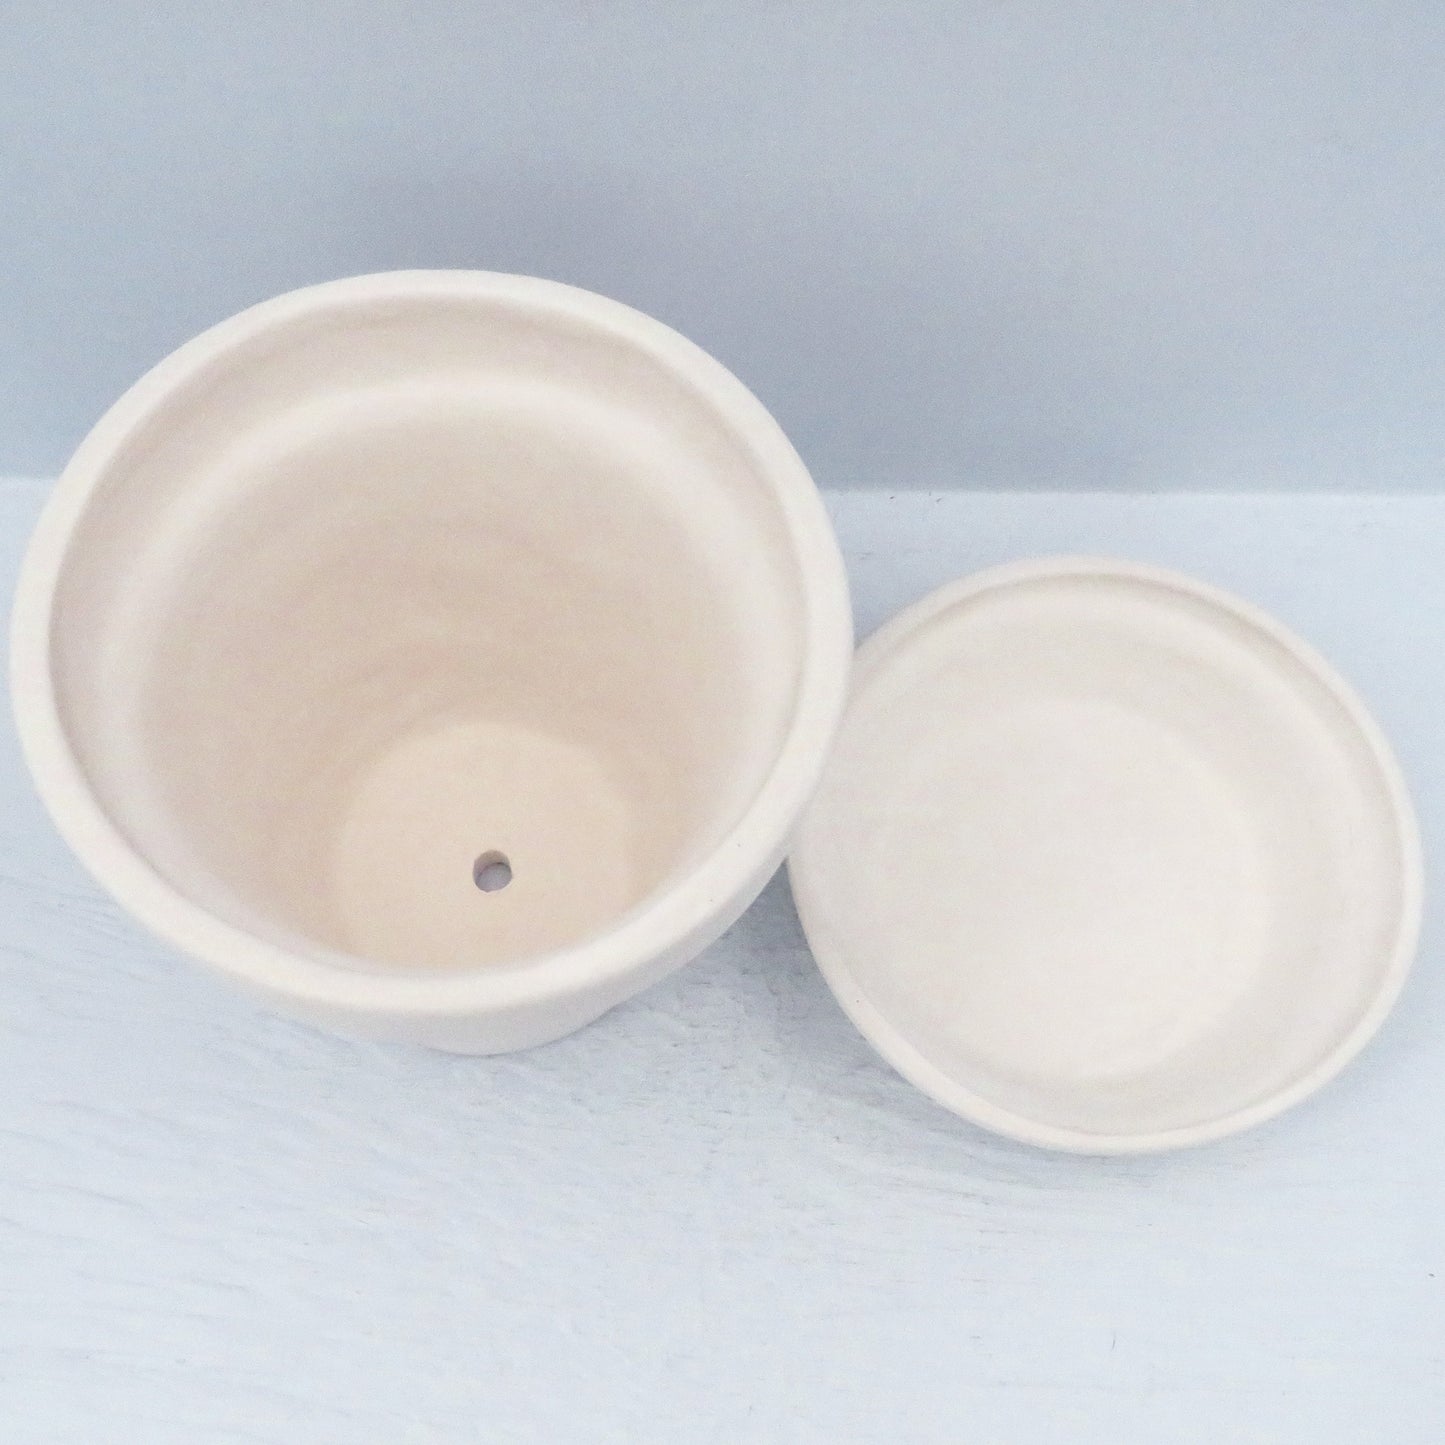 Unpainted Ceramic Pot, Handmade Ready to Paint Ceramic Planter and Saucer, Garden Lover Gift